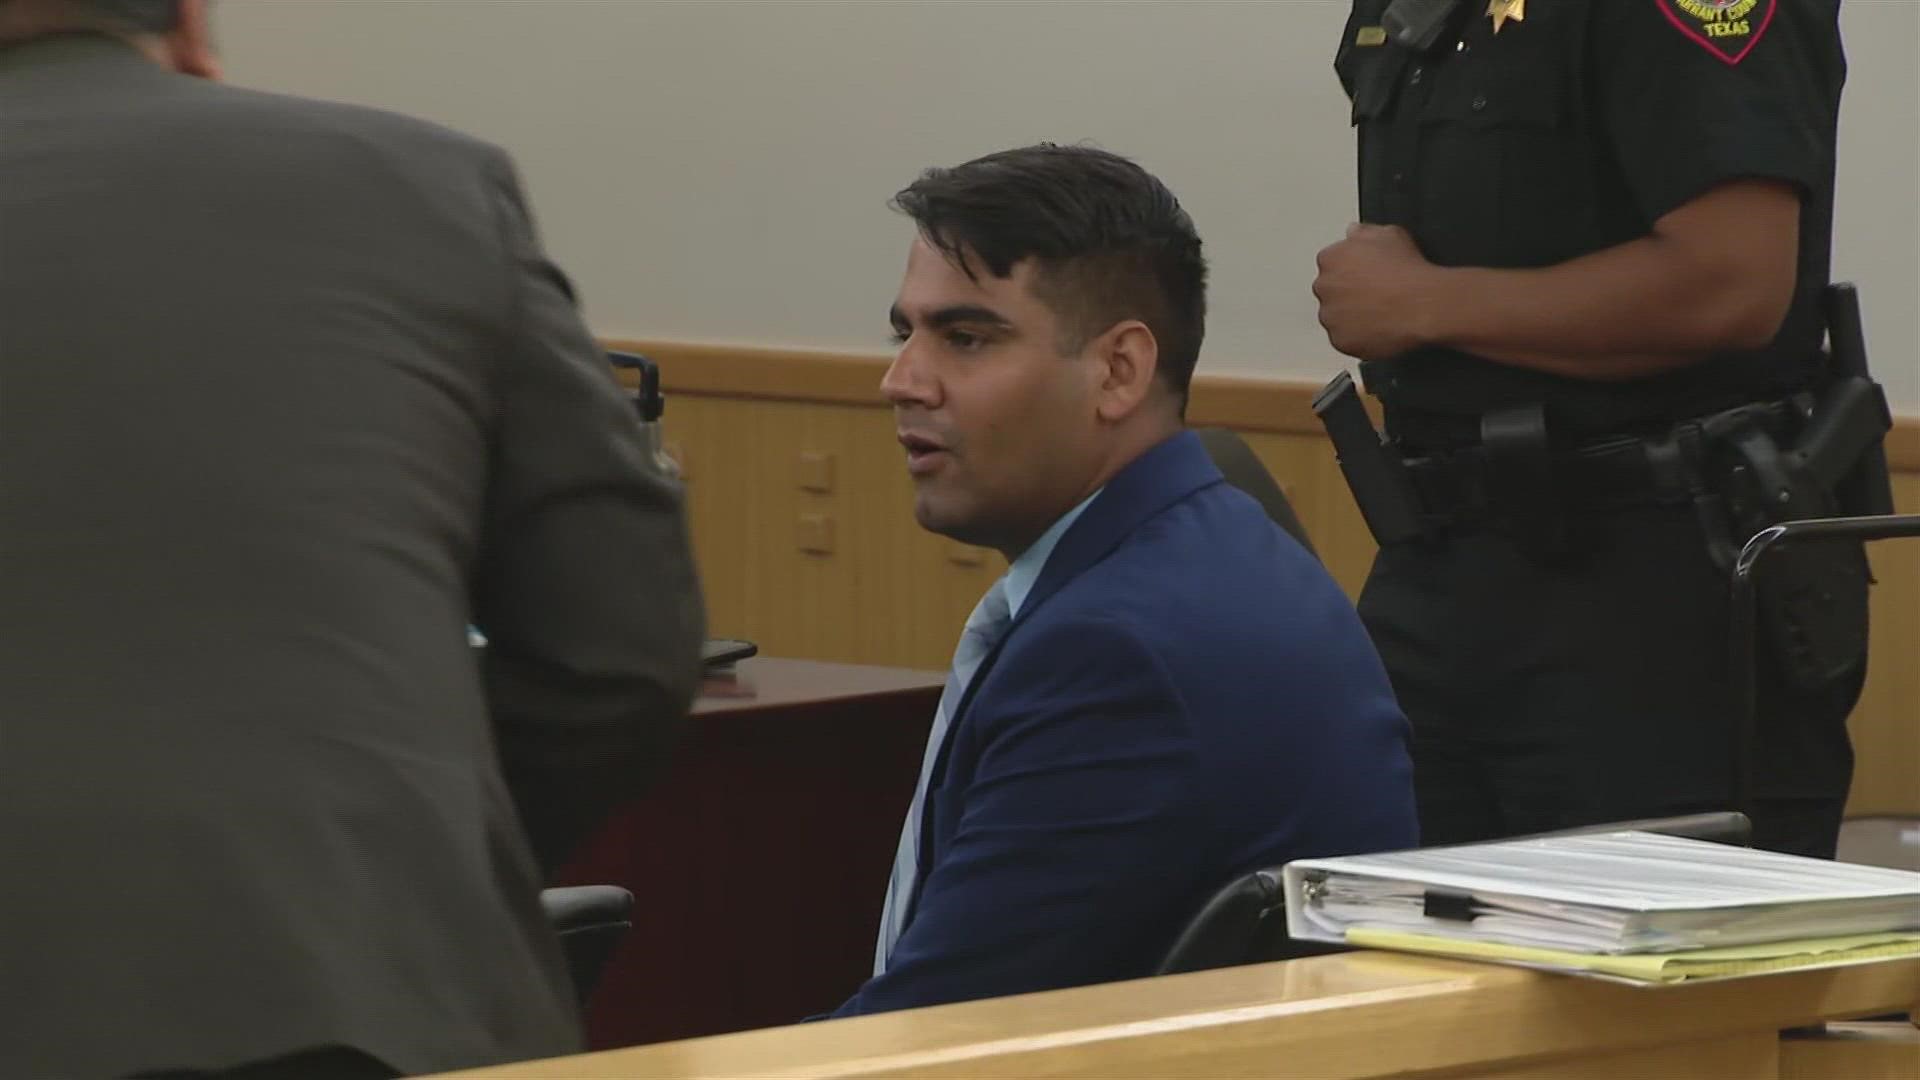 Ravi Singh was on trial after he shot and killed Margarita "Maggie" Brooks while responding to a welfare check.